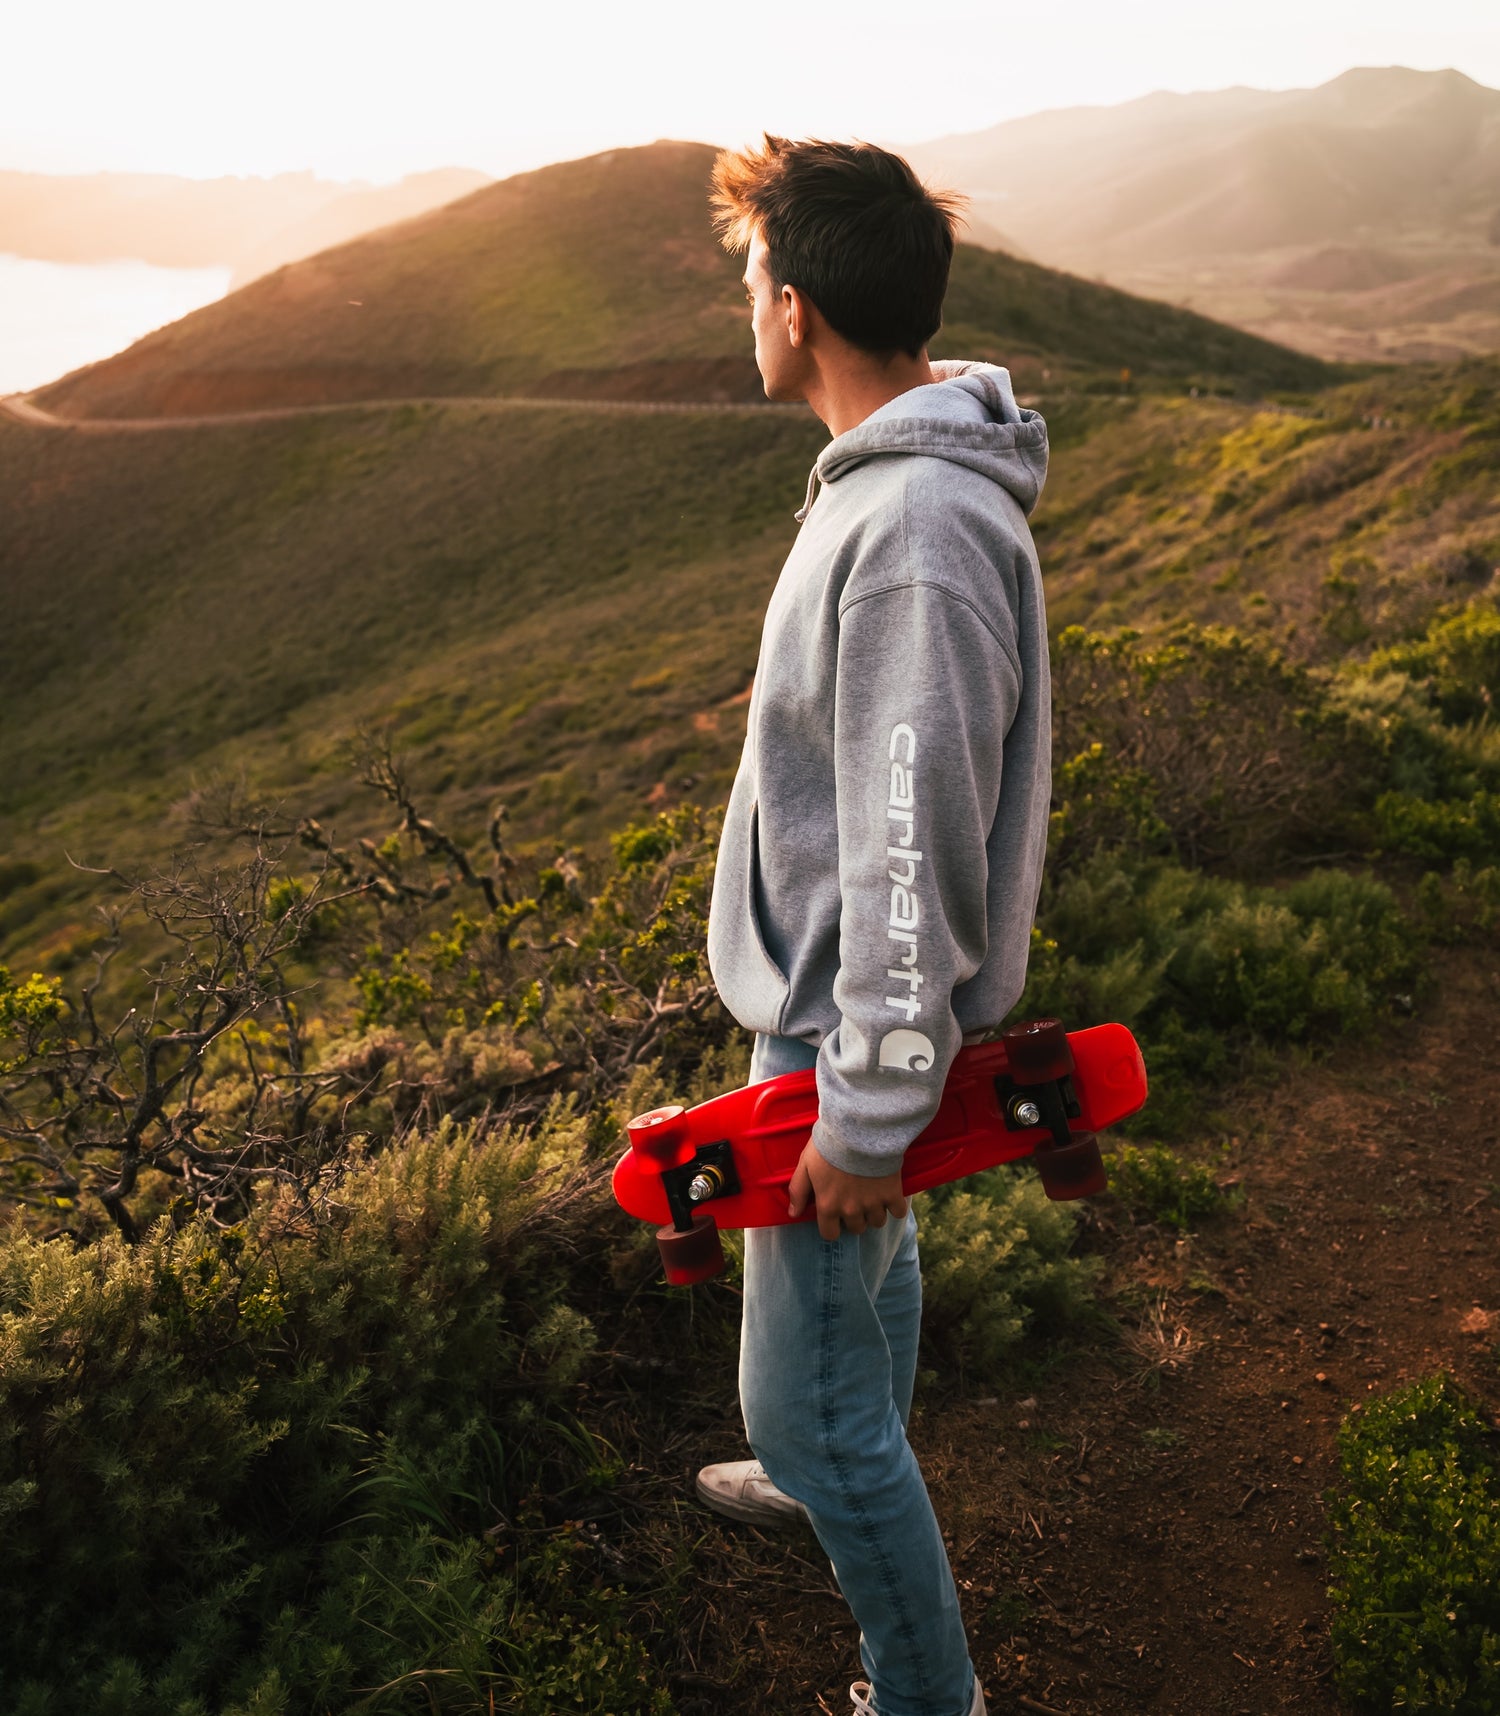 Penny Board [A Complete + Epic Guide]